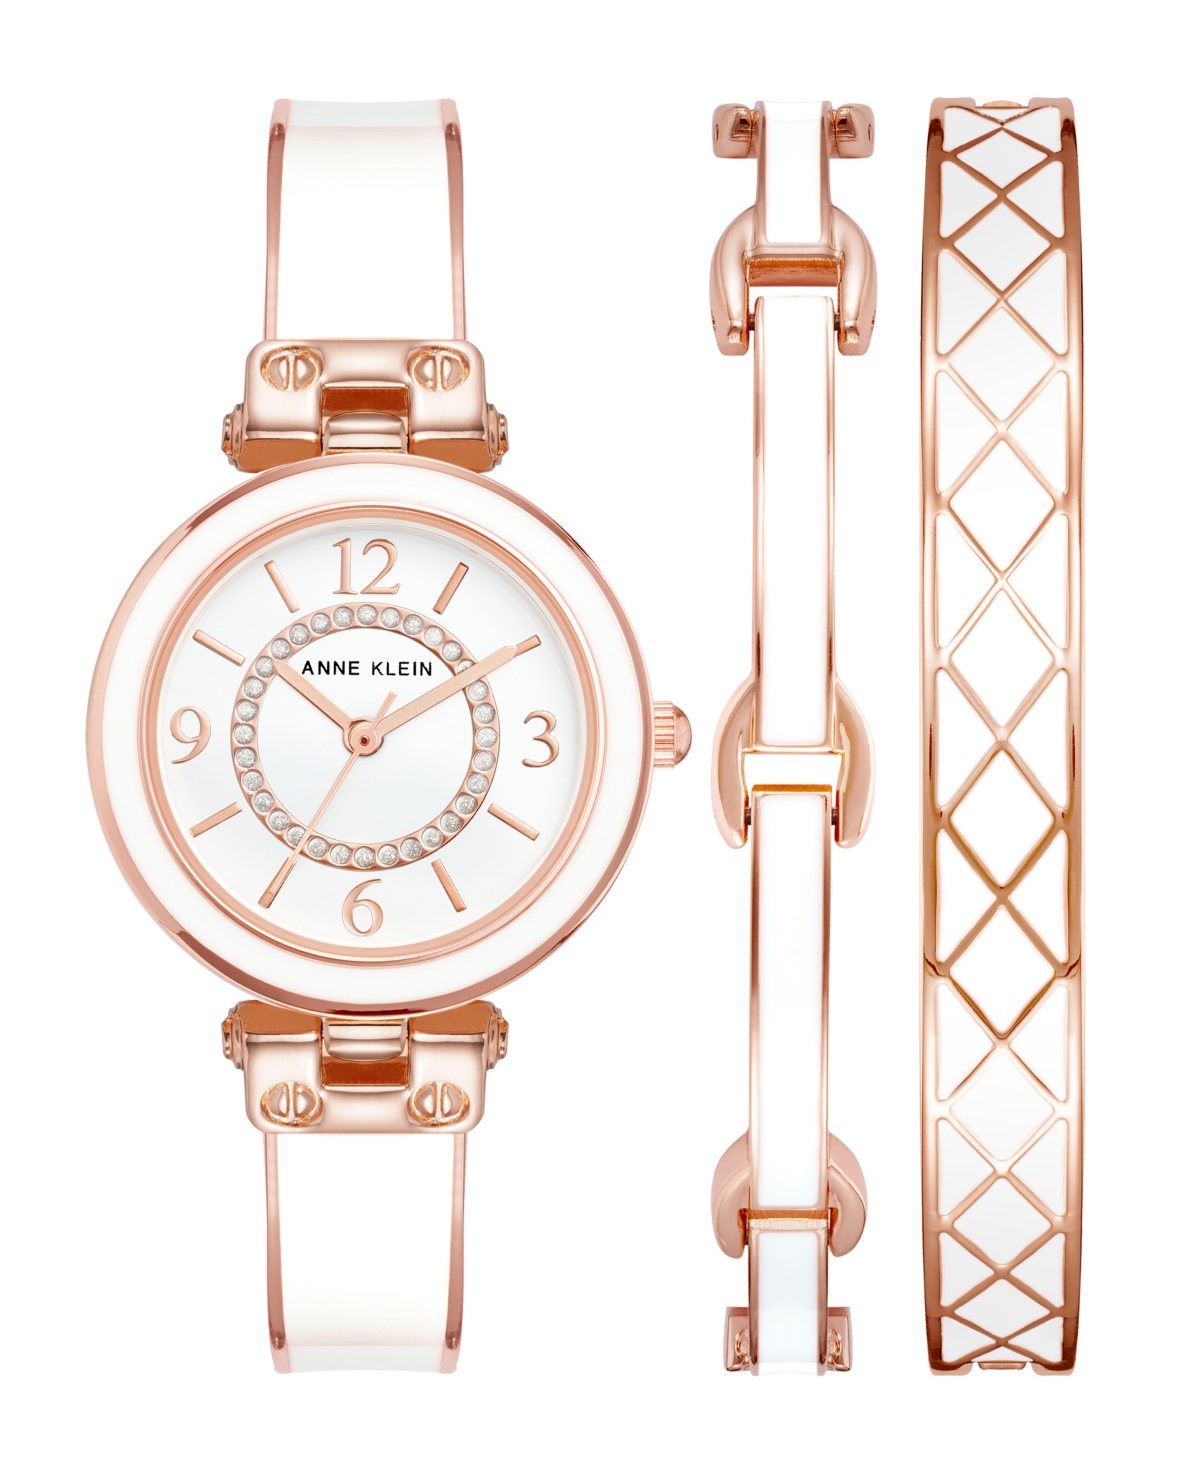 Anne Klein Women's Rose Gold-tone Alloy Bangle With White Enamel And Crystal Accents Fashion Watch 33mm Set 3 P In Rose Gold-tone,white